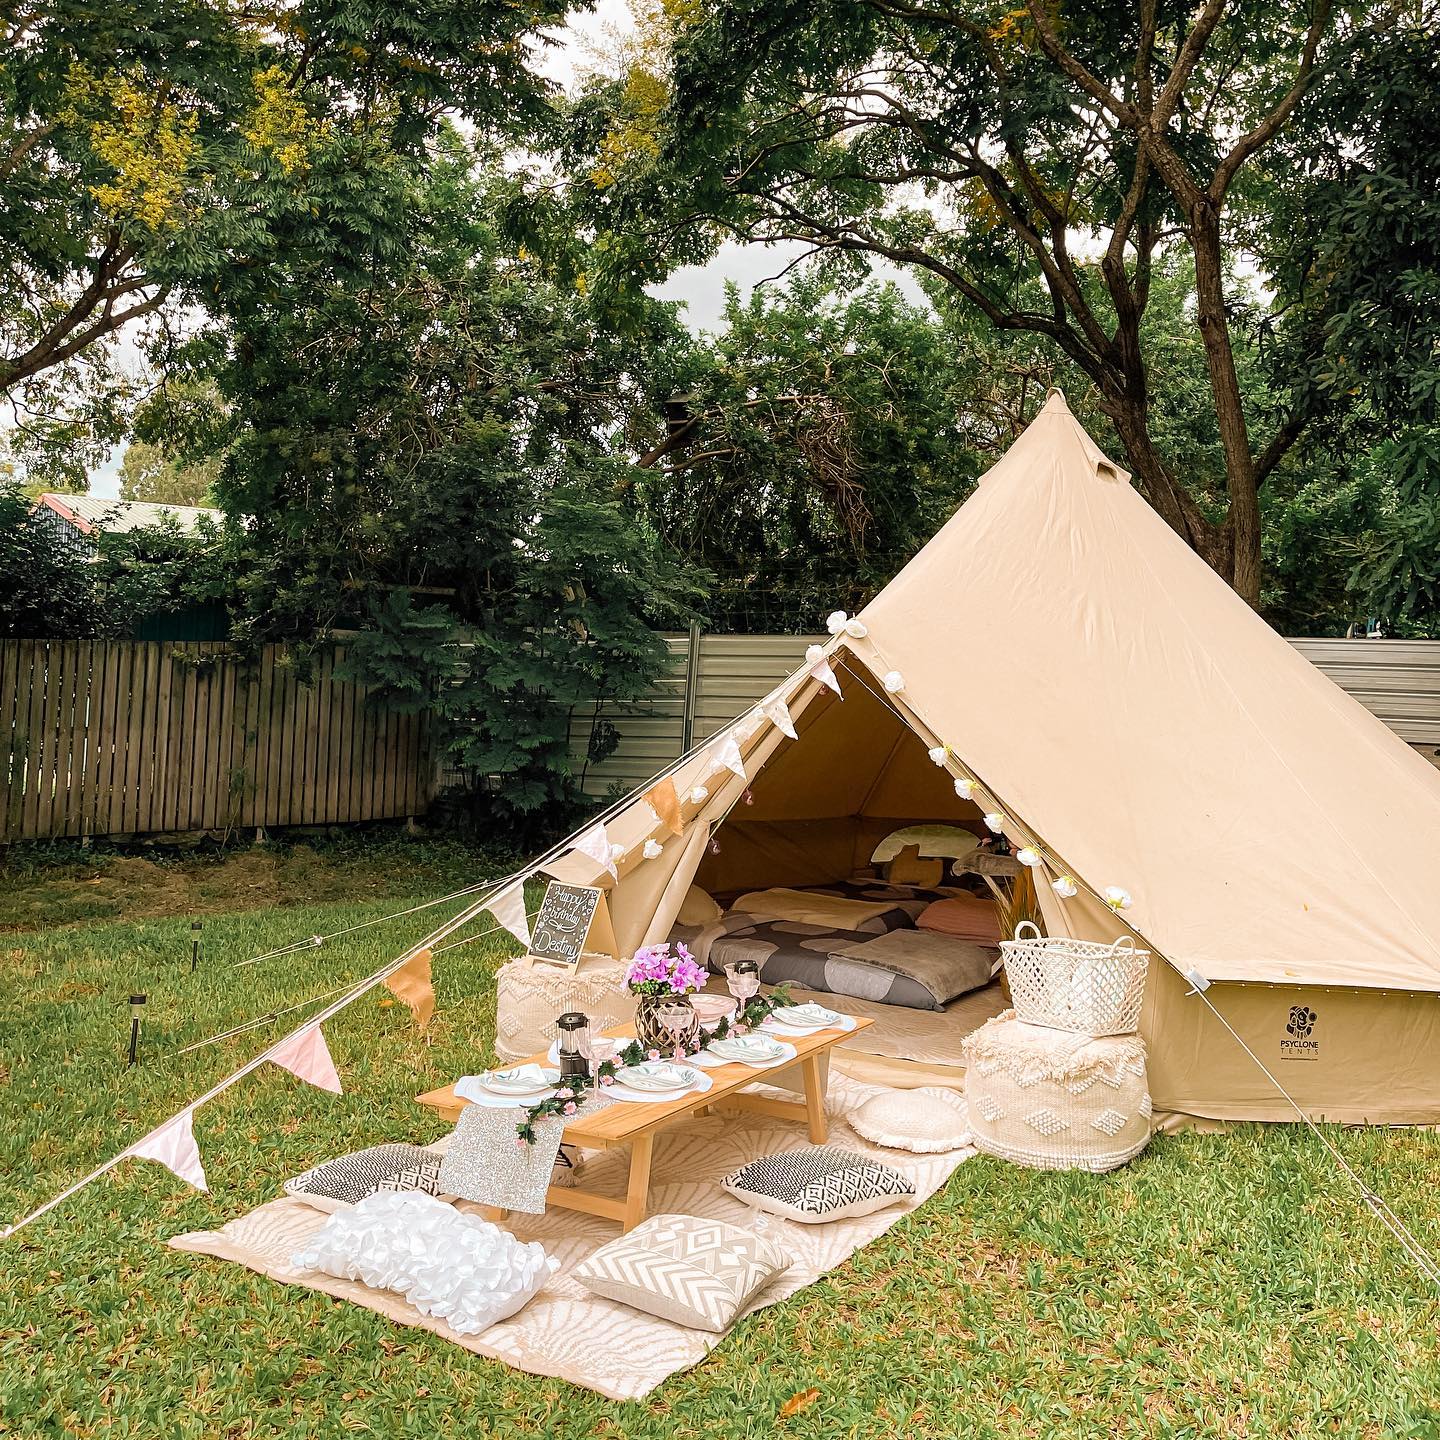 Backyard tent with blankets, floor cushions, and small table. Photo by Instagram user @glamparoo